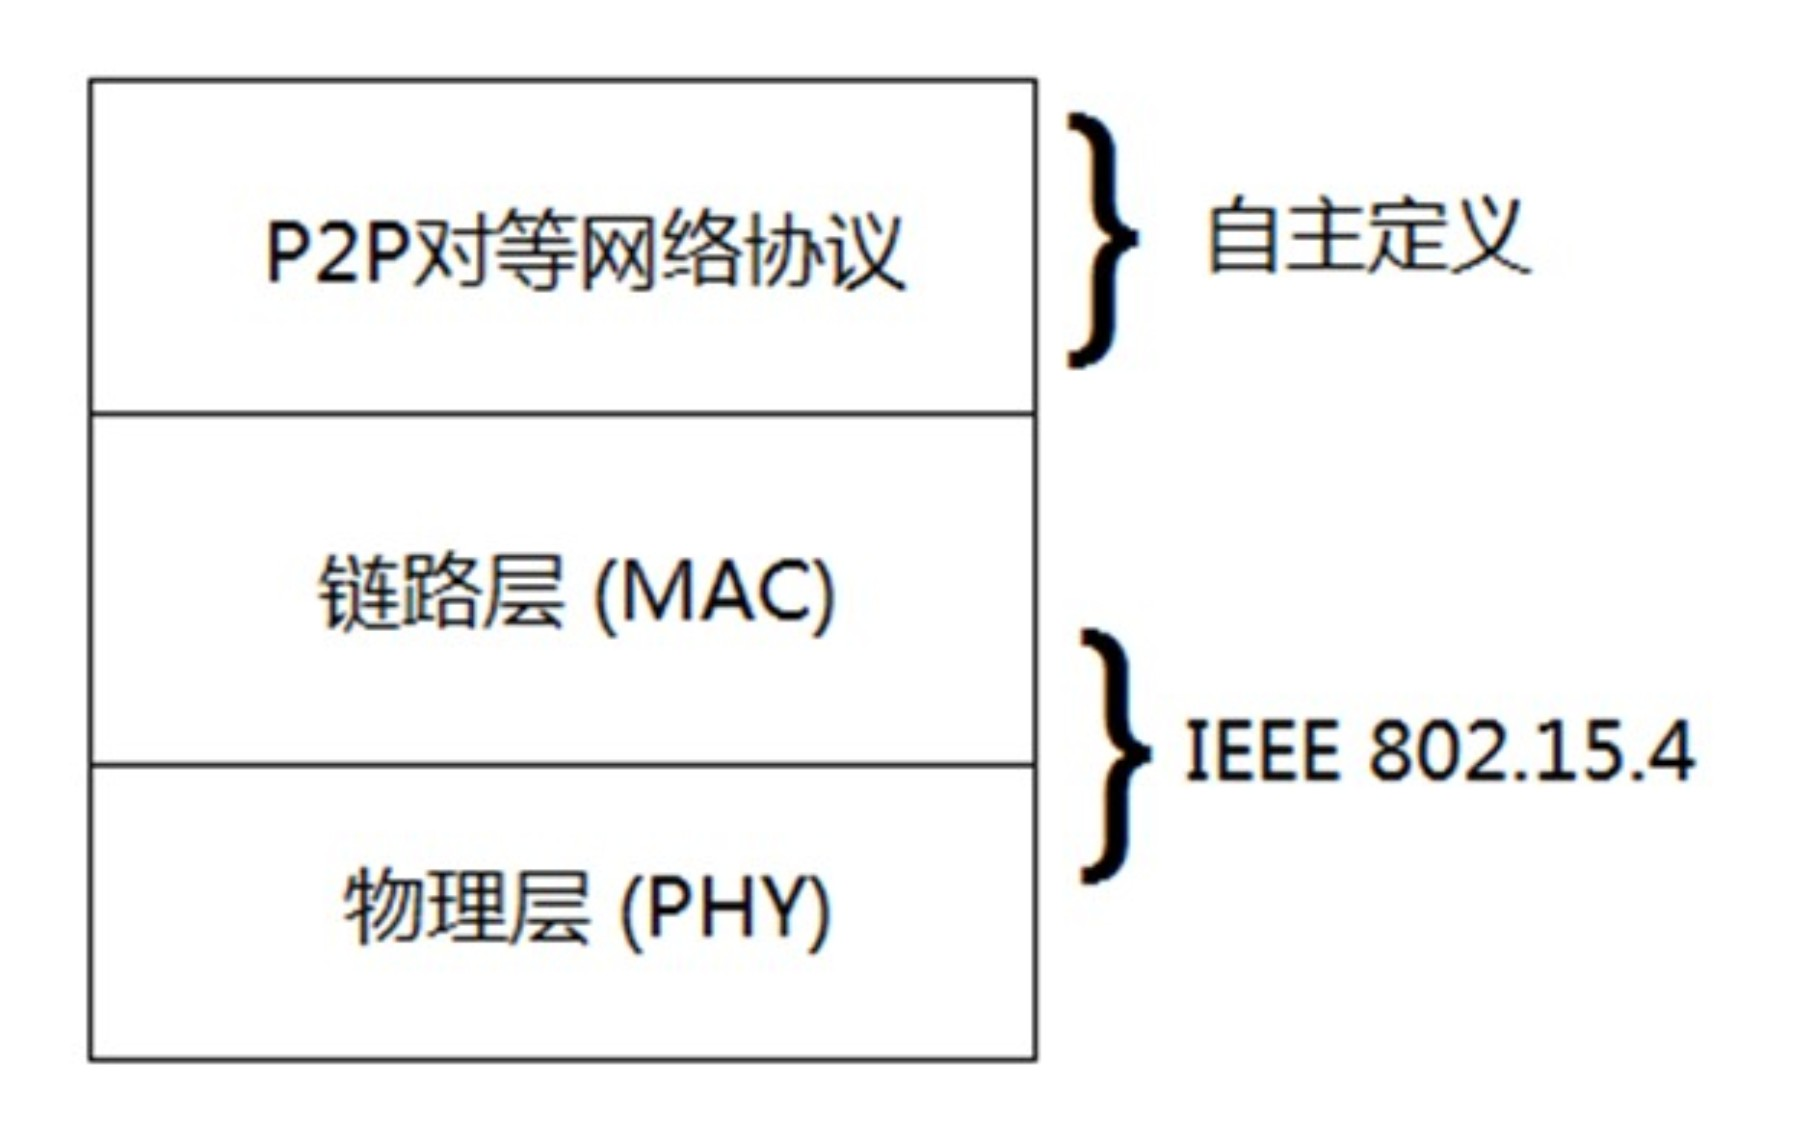 Method for realizing peer-to-peer network based on IEEE (Institute of Electrical and Electronic Engineers) 802.15.4